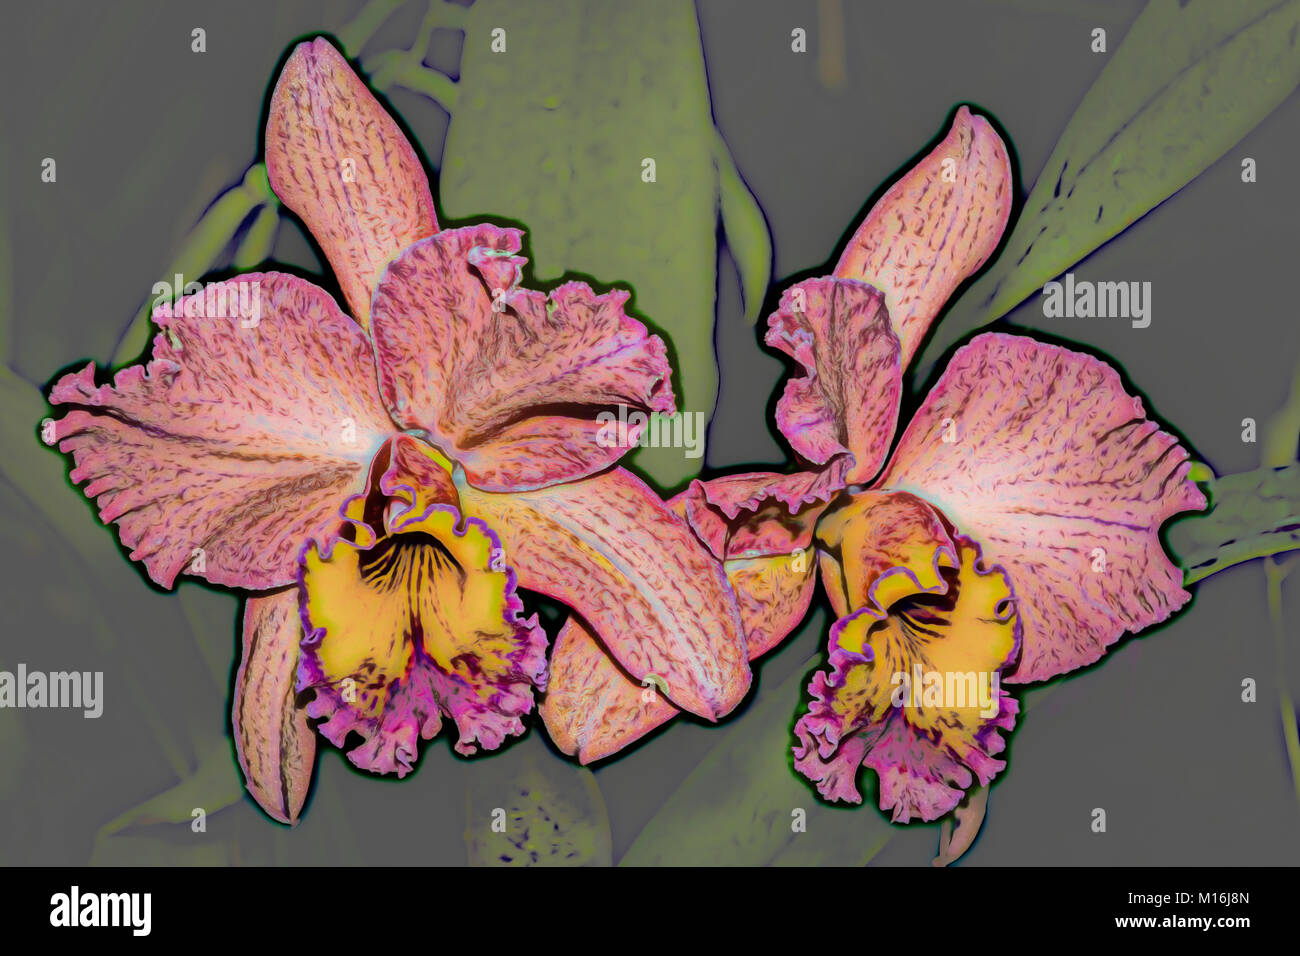 Closeup of bright colorful artistic Orchid flowers Stock Photo